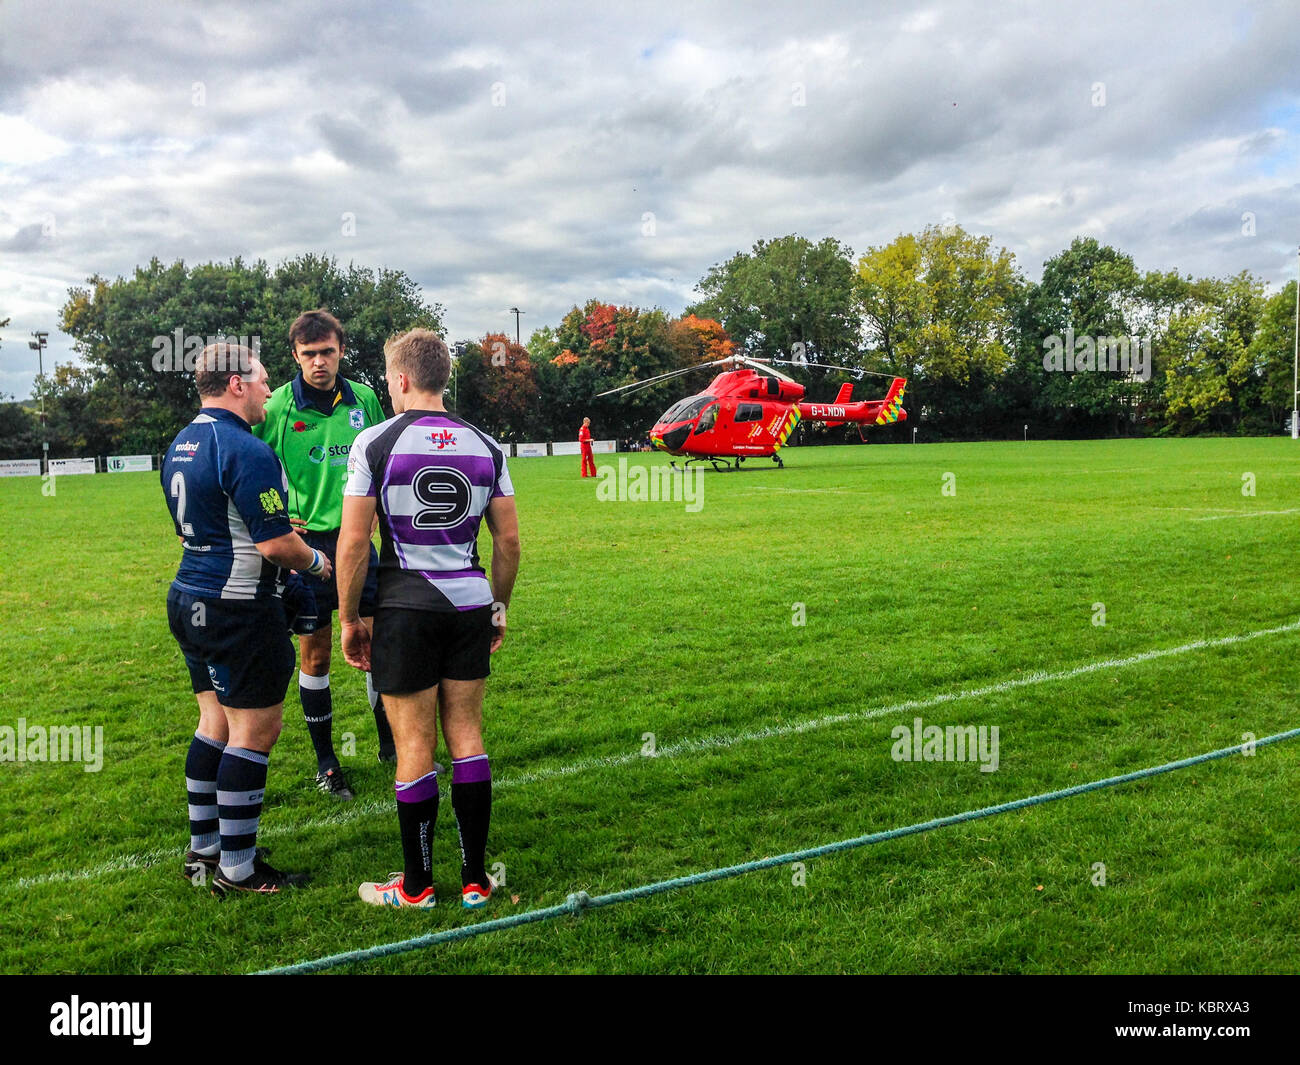 Woodford Green, London, UK. 30th September 2017. Referee confers with team captains as London’s  Air Ambulance helicopter G-LNDN lands at Woodford Rugby Football Club's Highams ground in Woodford Green in response to a report of a spectator suffering a heart attack. The Woodford v Chelmsford match was suspended for 40 minutes whilst paramedics attended to the casualty who was able to leave by road.  Woodford went on to win the match. The Air Ambulance is supported by London Freemasons.  Credit: Mark Dunn/ Alamy Live News Stock Photo